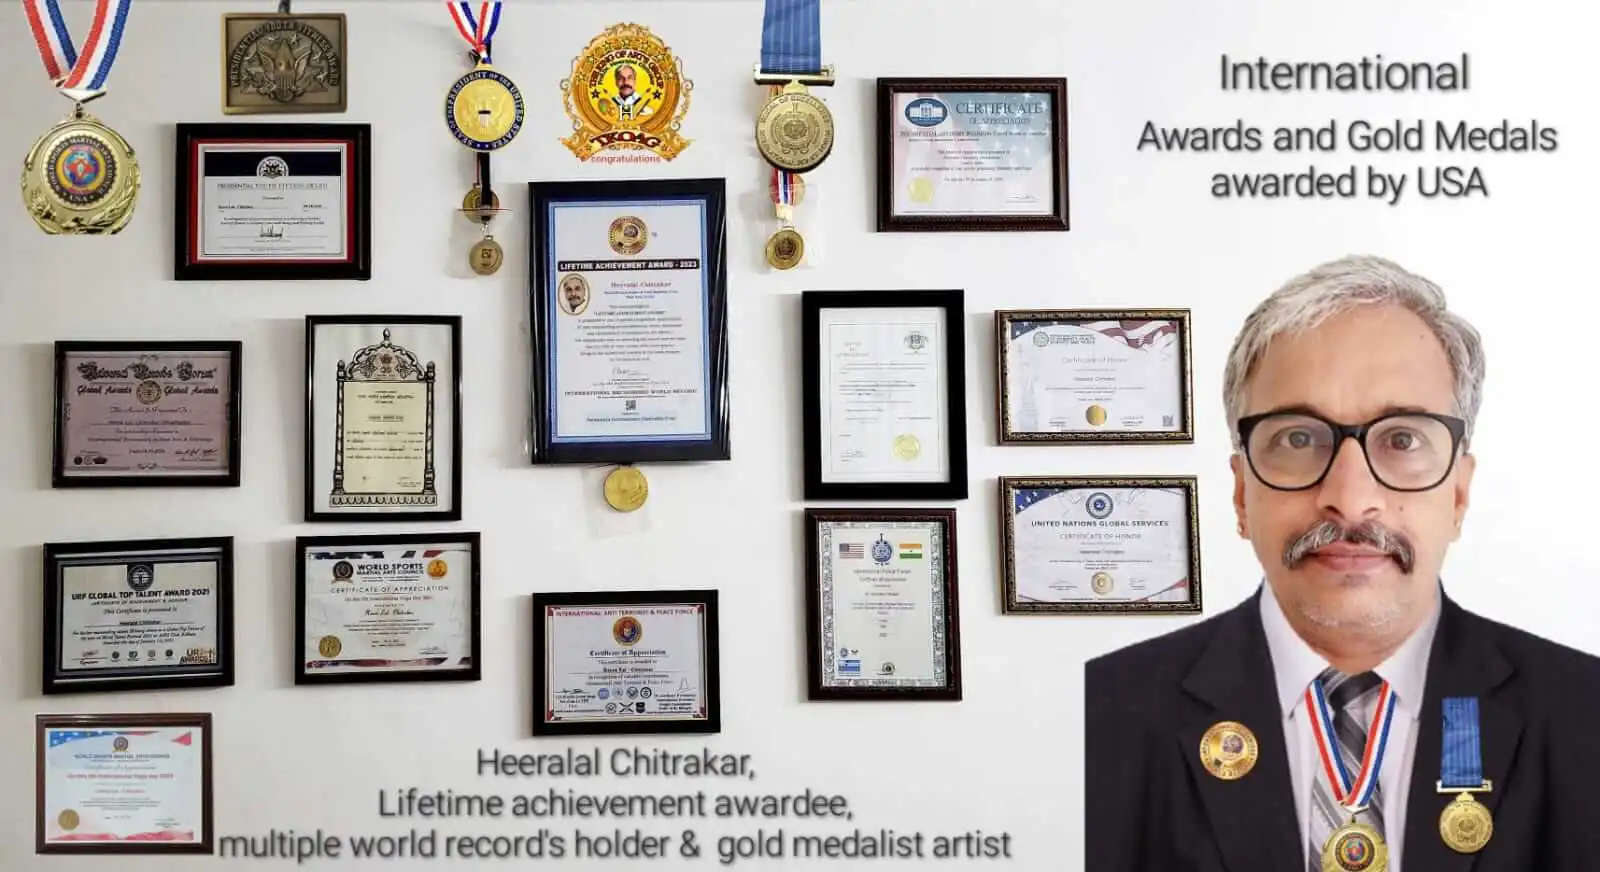 Profile picture of Heeralal Chitrakar Bhadrecha along with a number of medals and awards hanged on wall behind